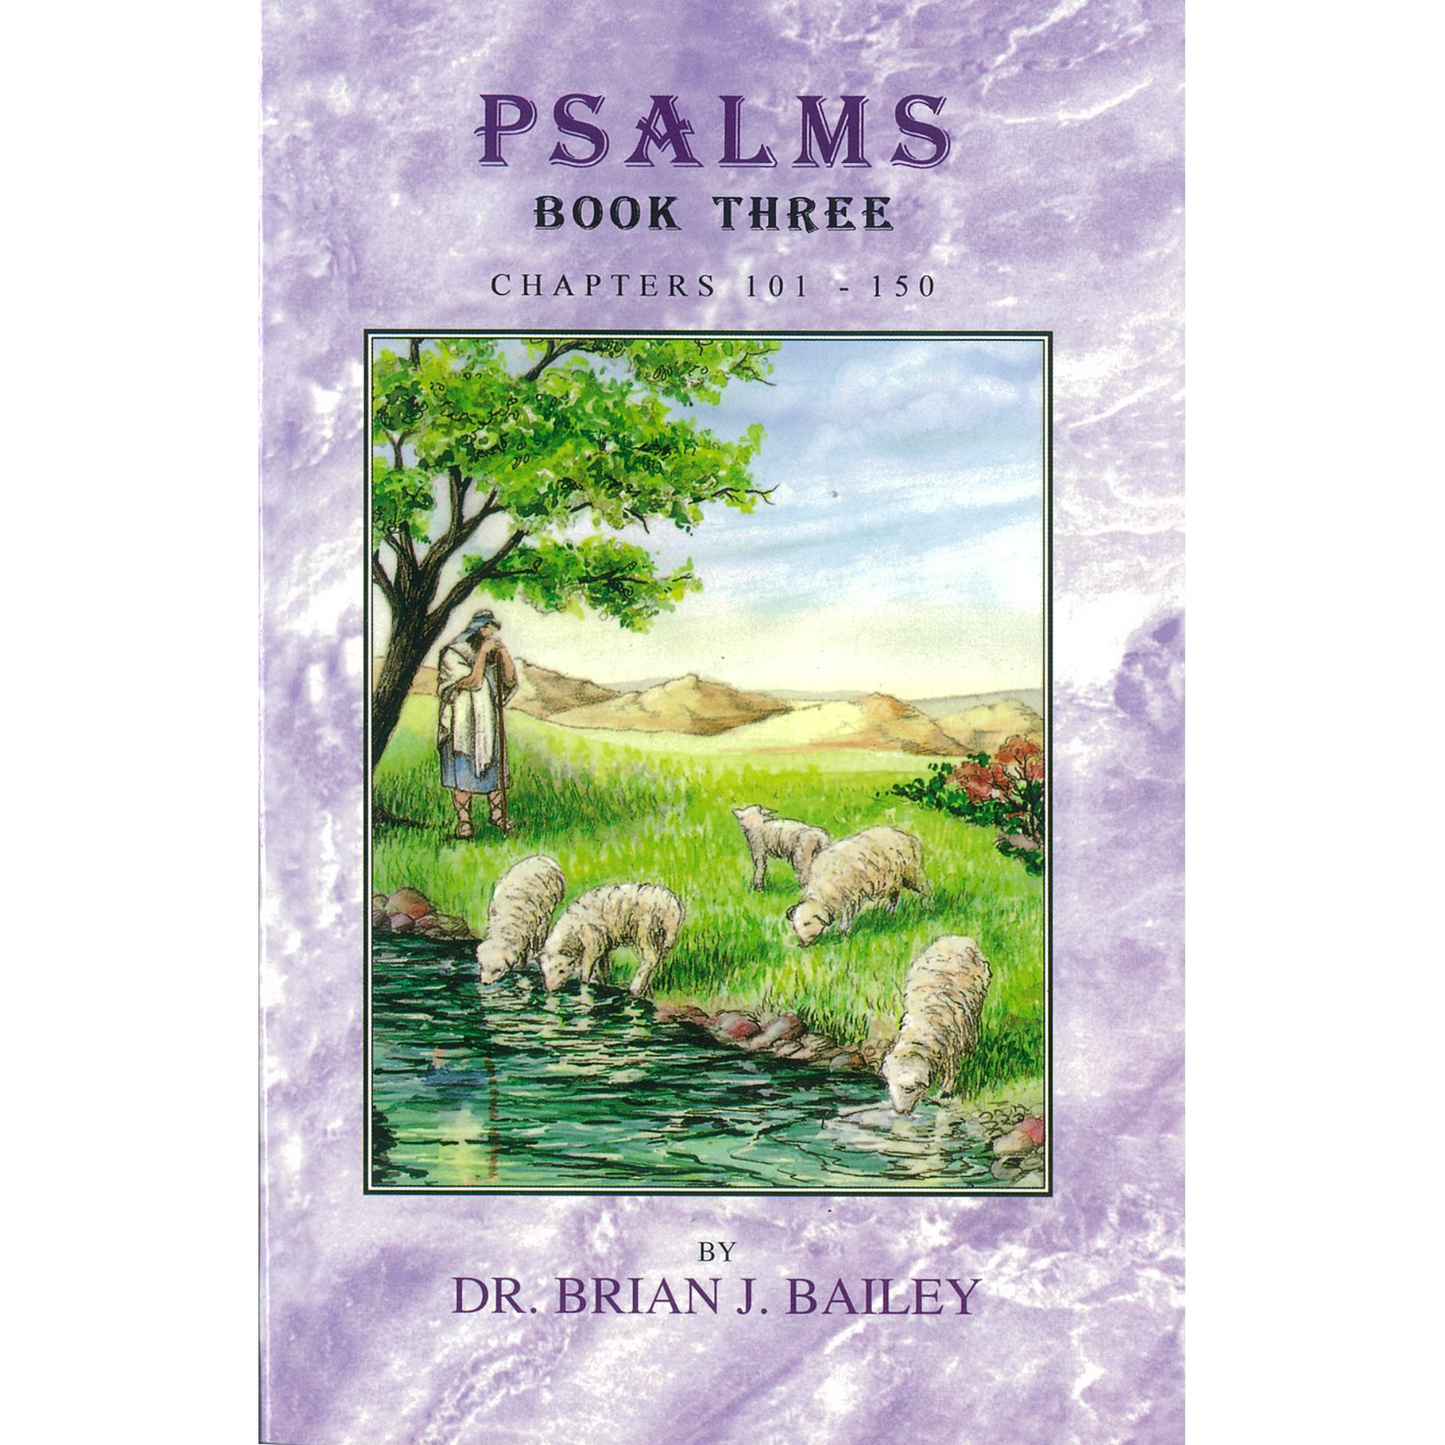 Psalms Book Three (Chapters 101 - 150)